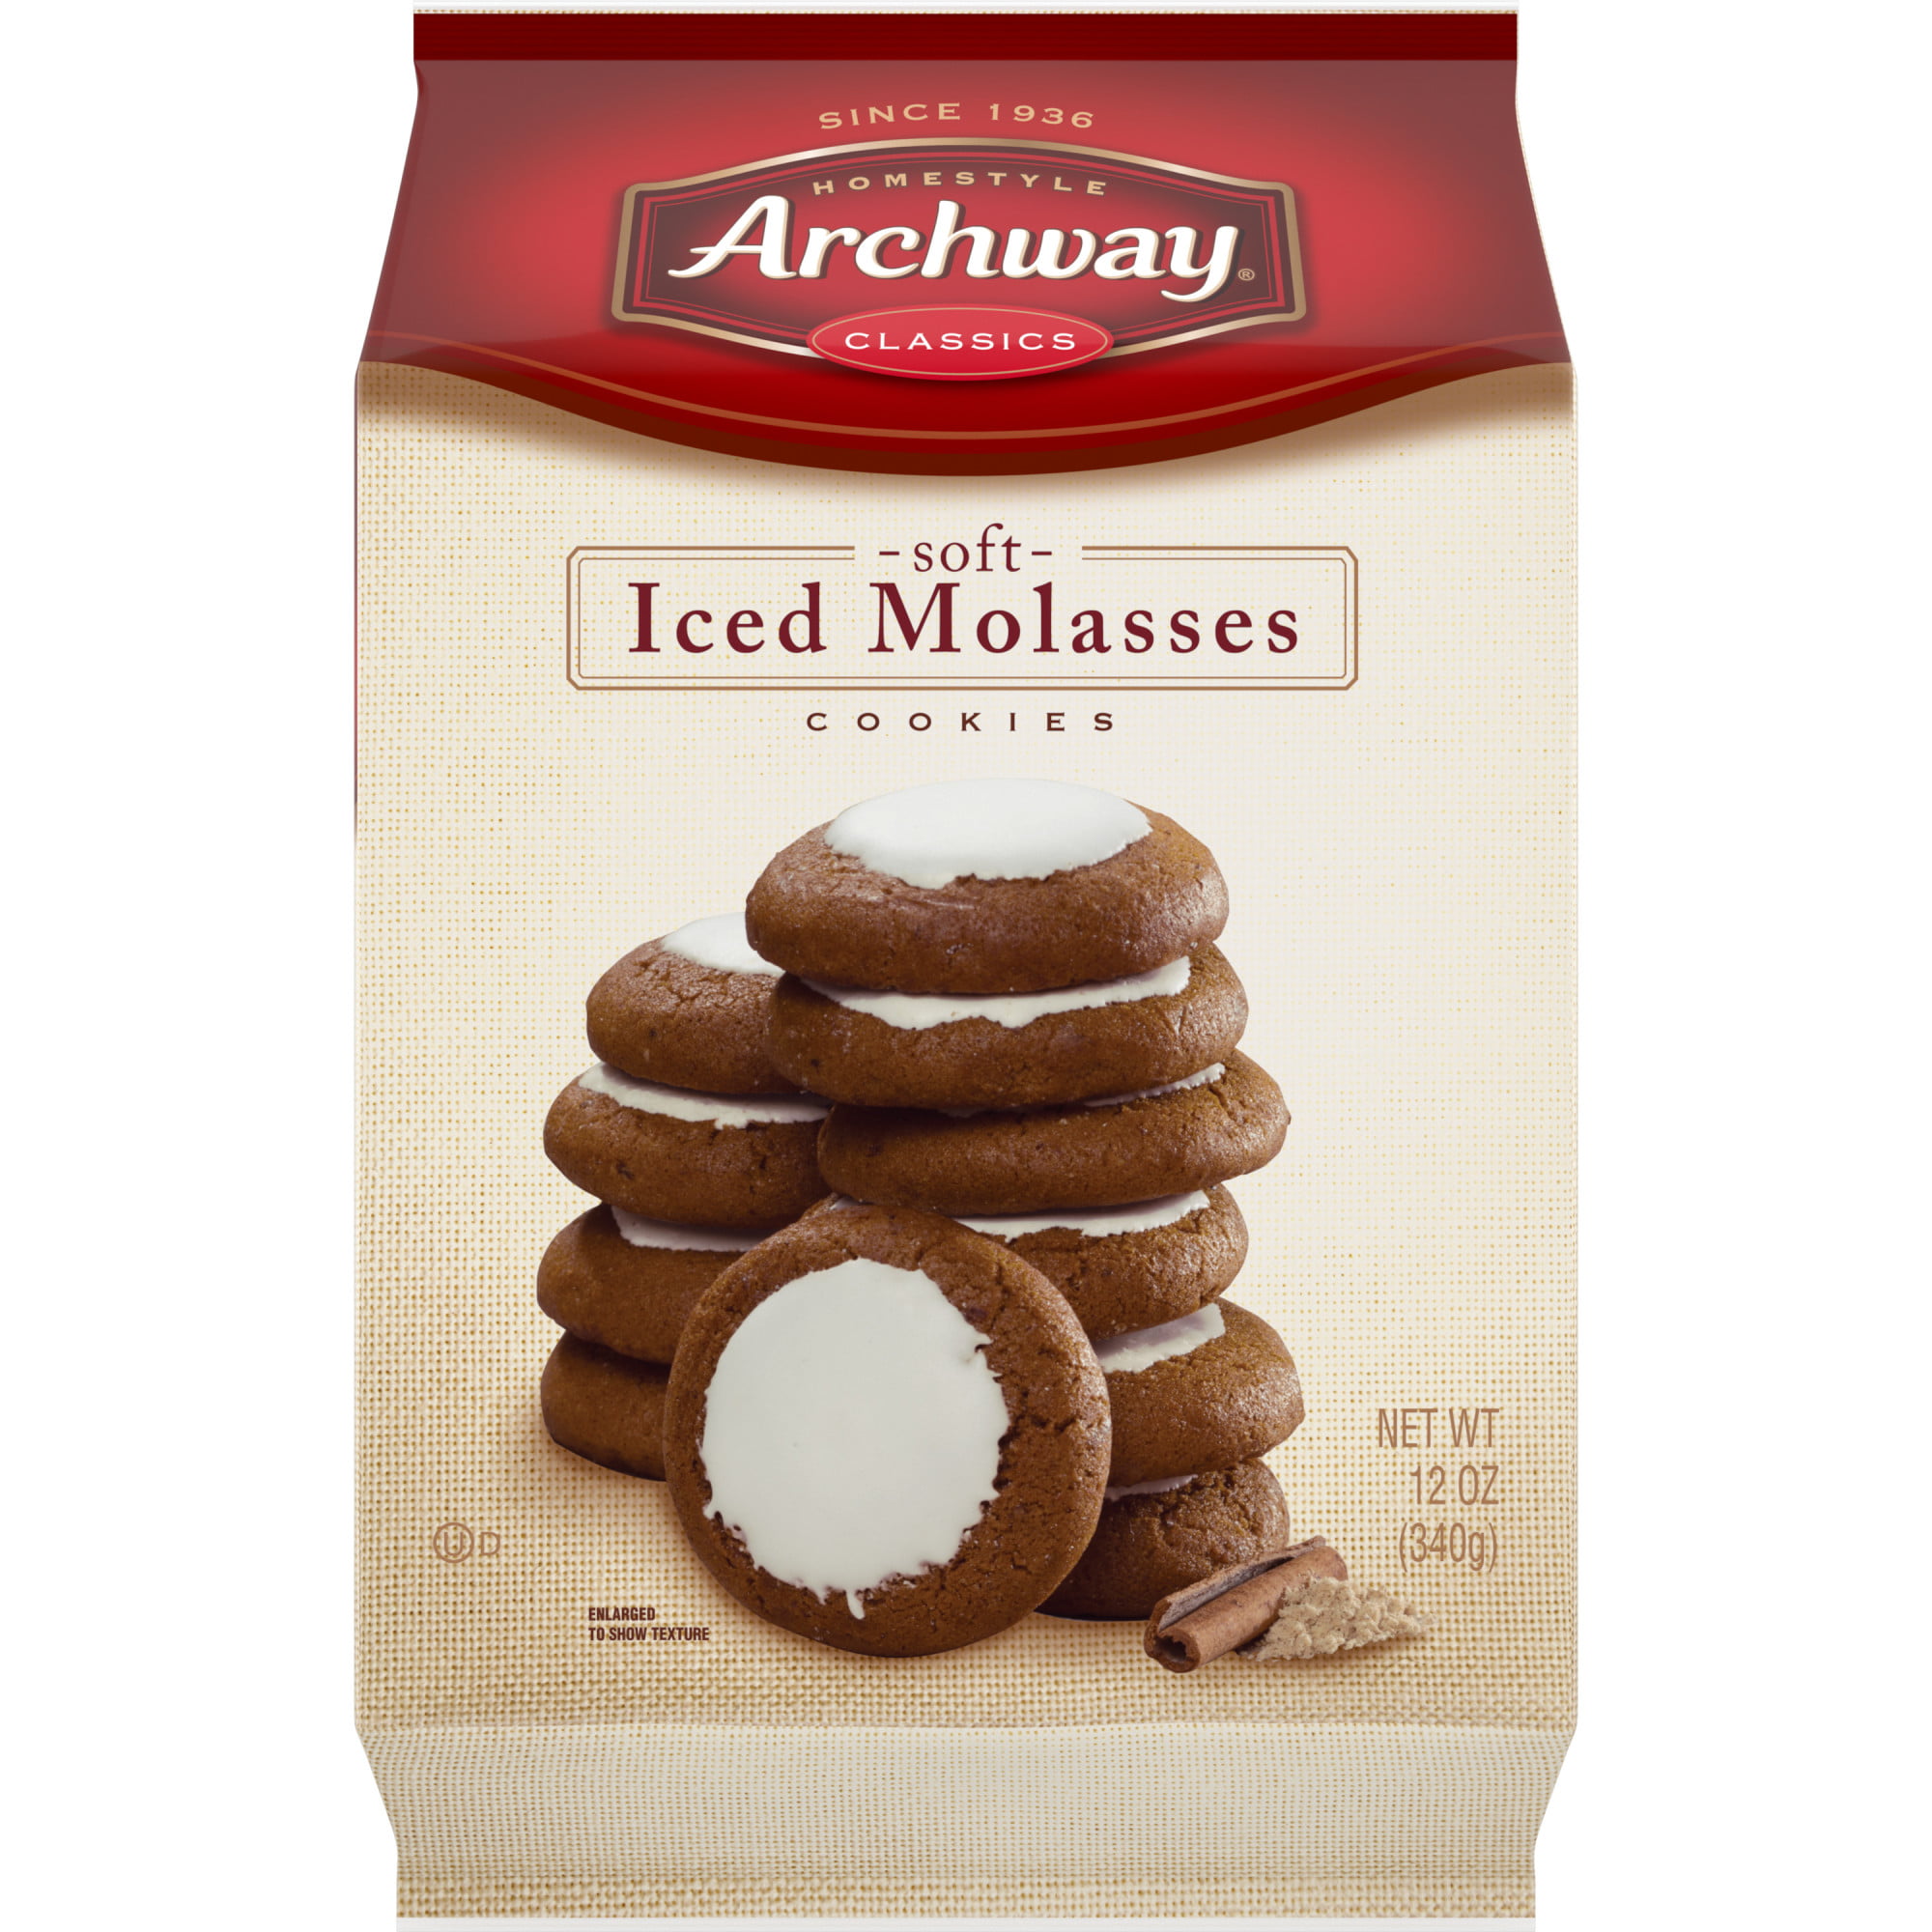 Photo 1 of Archway Cookies, Iced Molasses Classic Soft, 12 oz 2 pack and one silicone bath scrub